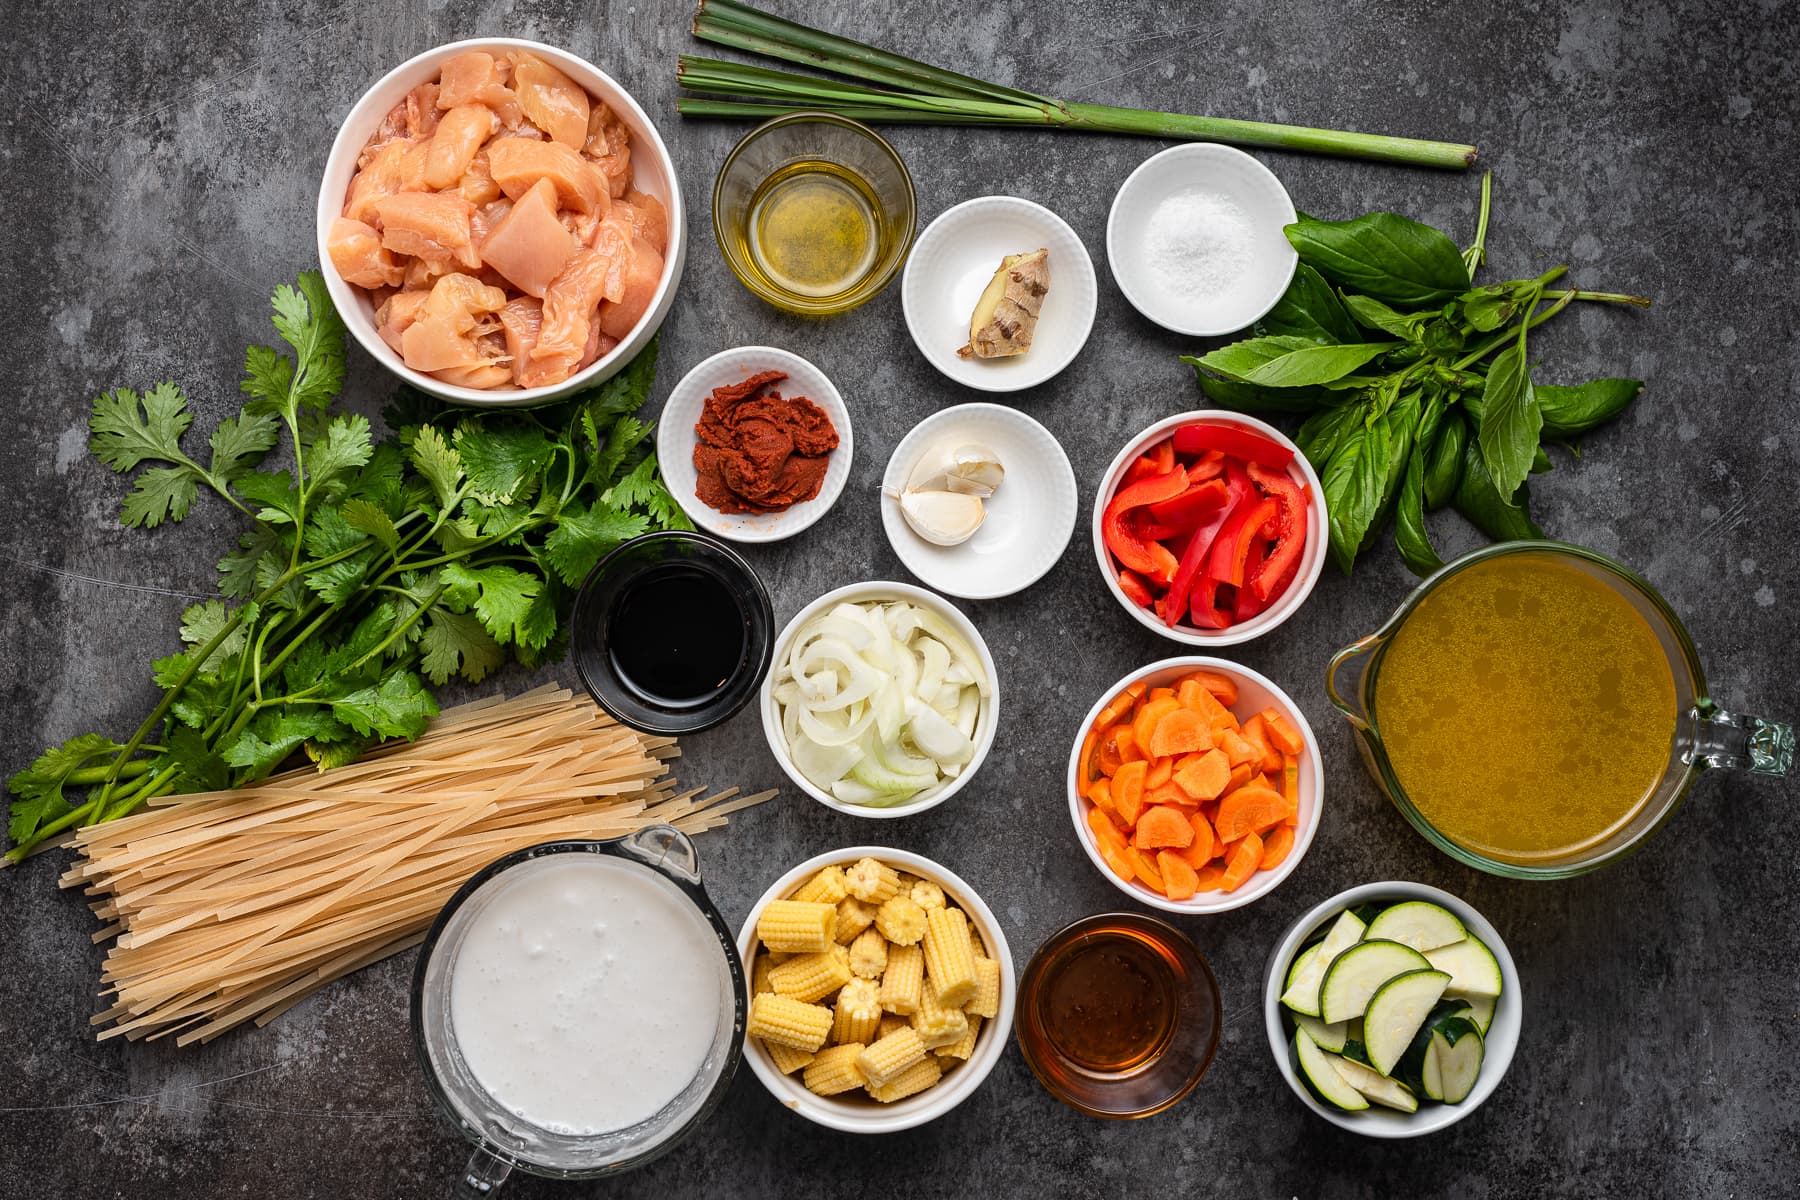 chicken, vegetables, stock, lemongrass, noodles among other ingredients for thai curry soup